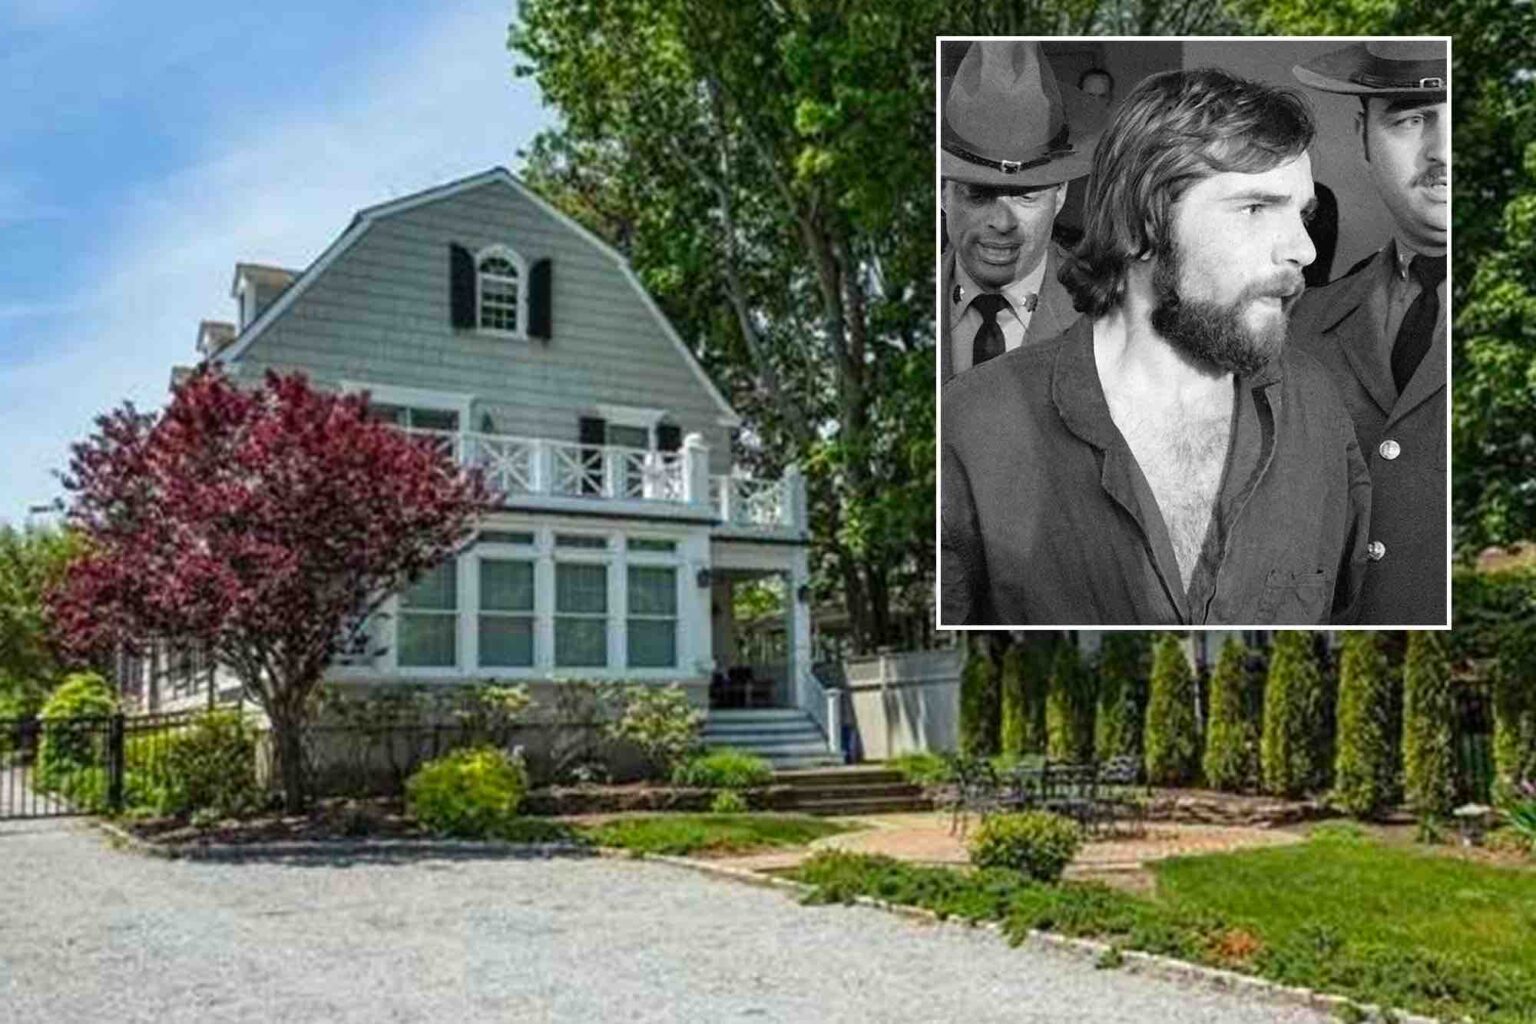 Curious about the case that gave Amityville it's terrifying reputation? Learn the true terrifying story of the Amityville Horror House.